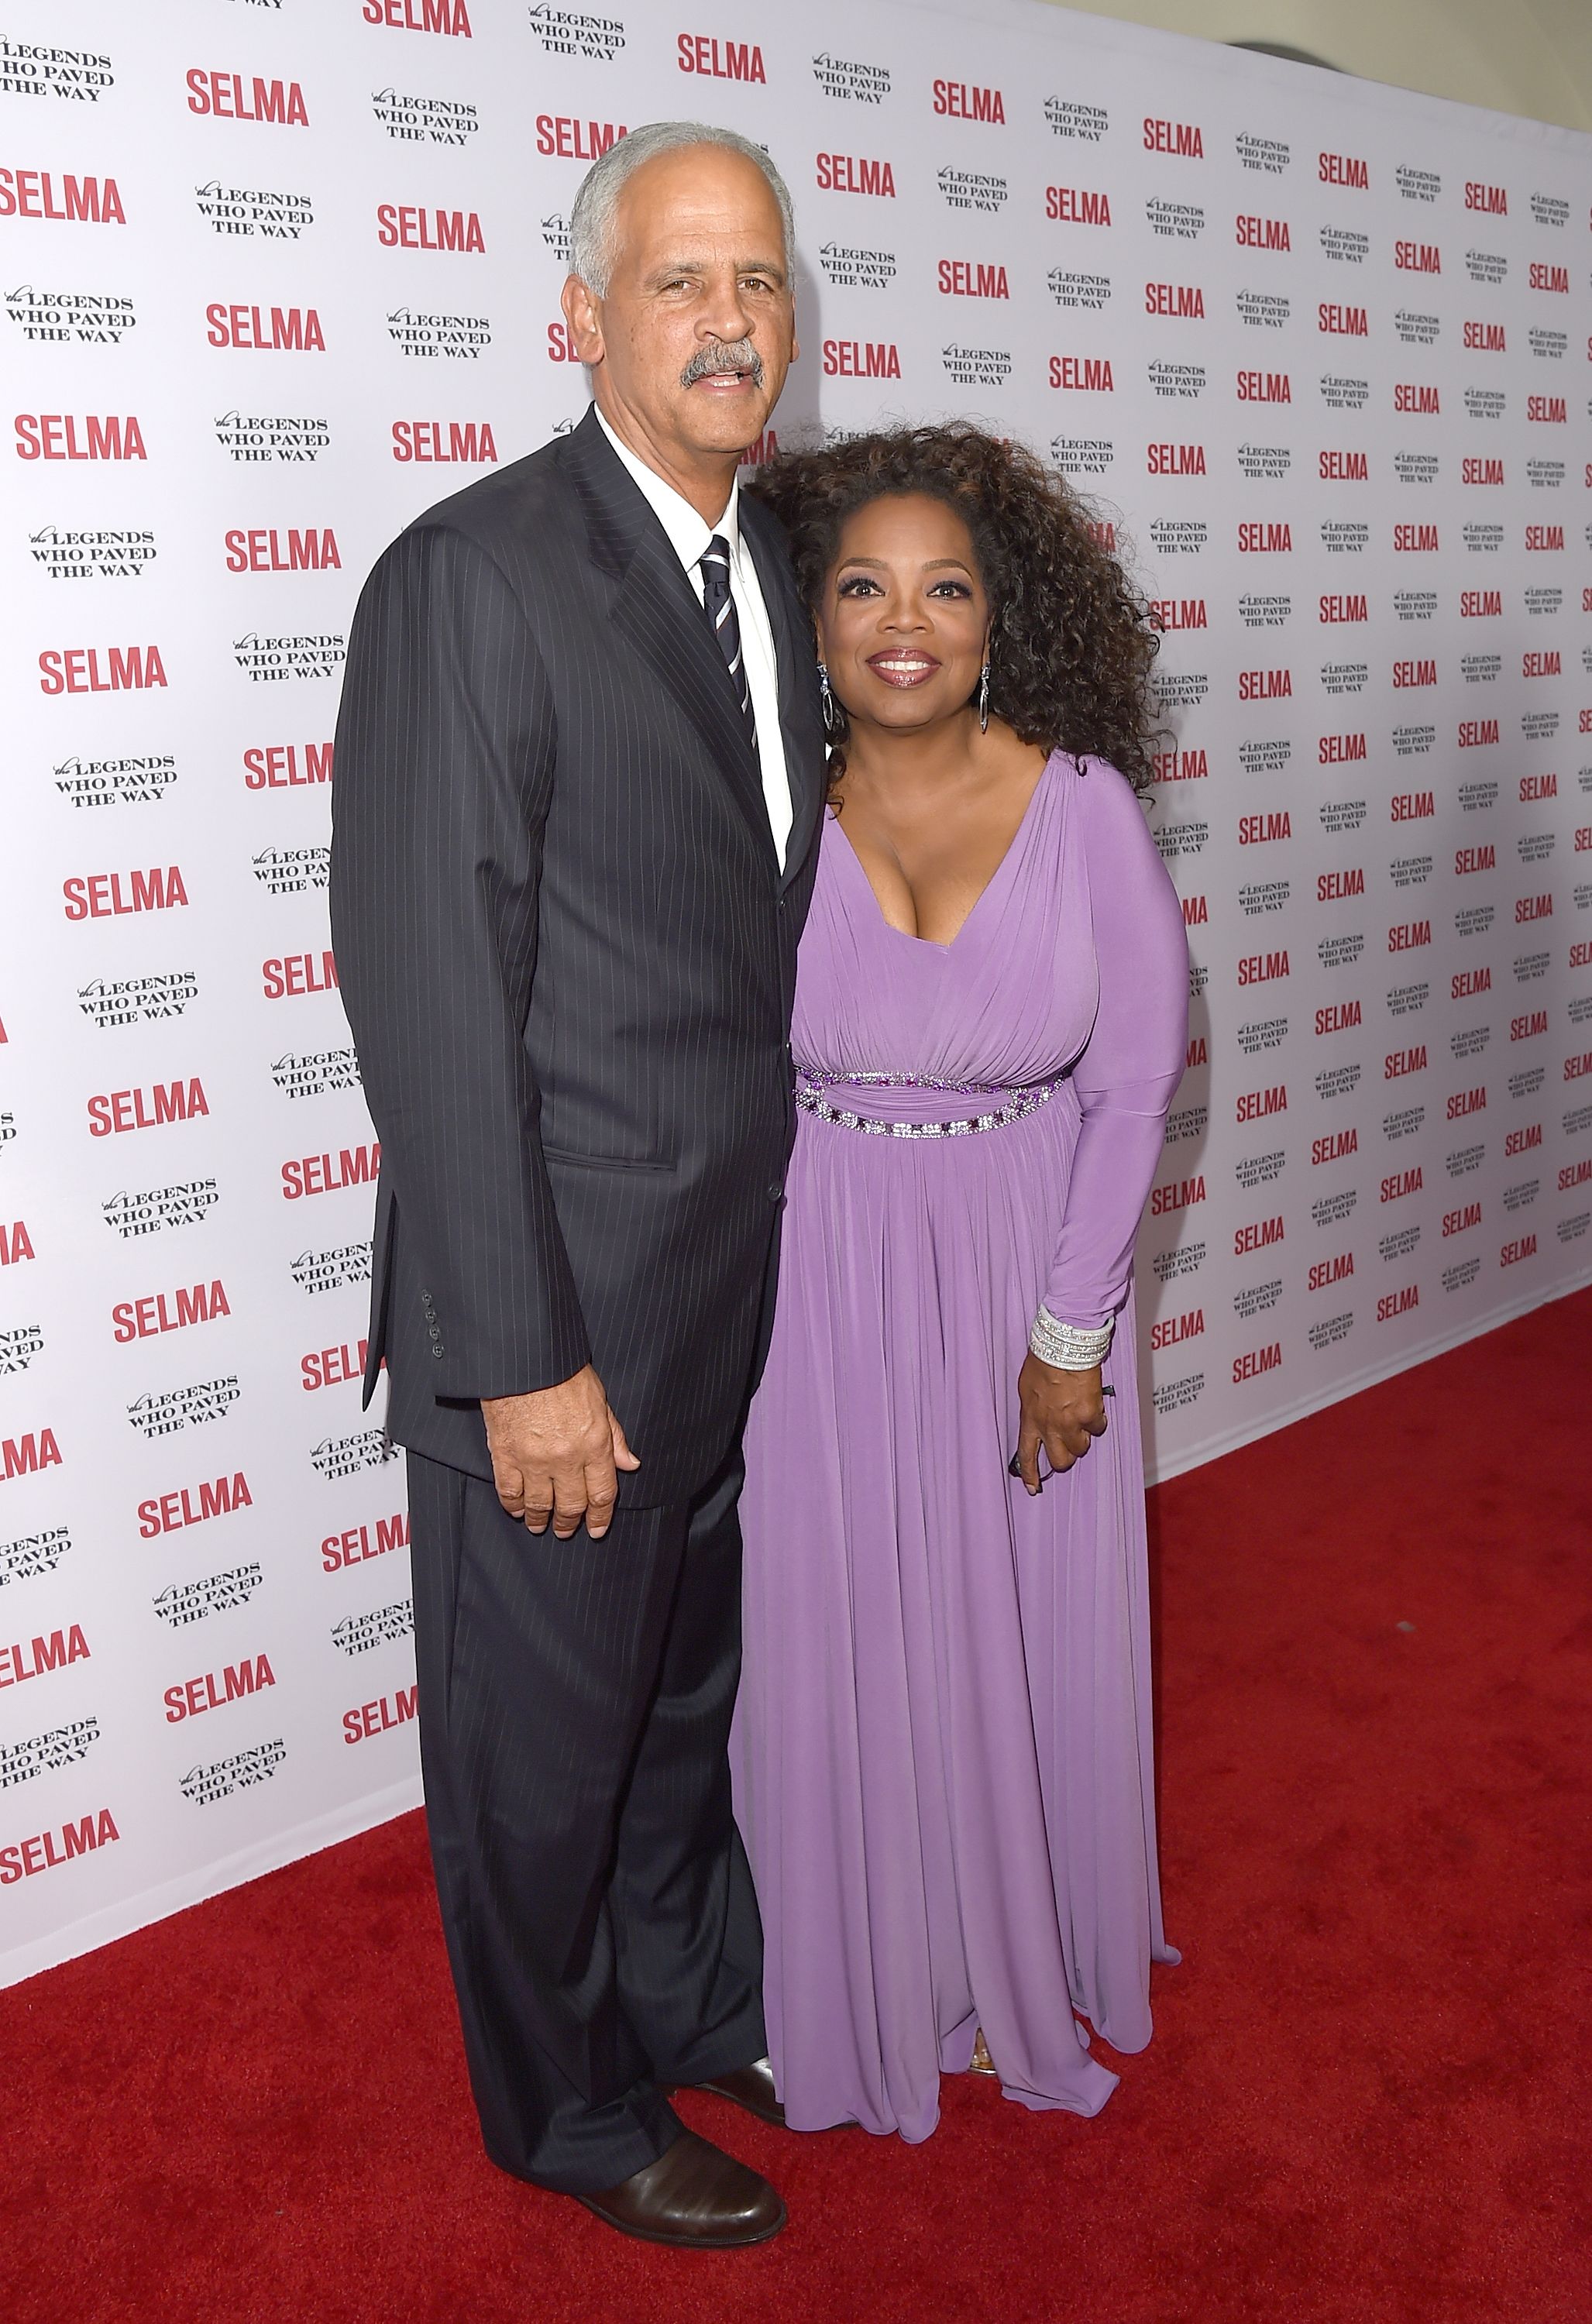 Oprah Winfrey and Stedman Graham attend the 'Selma' and the Legends Who Paved the Way Gala | Source: Getty Images